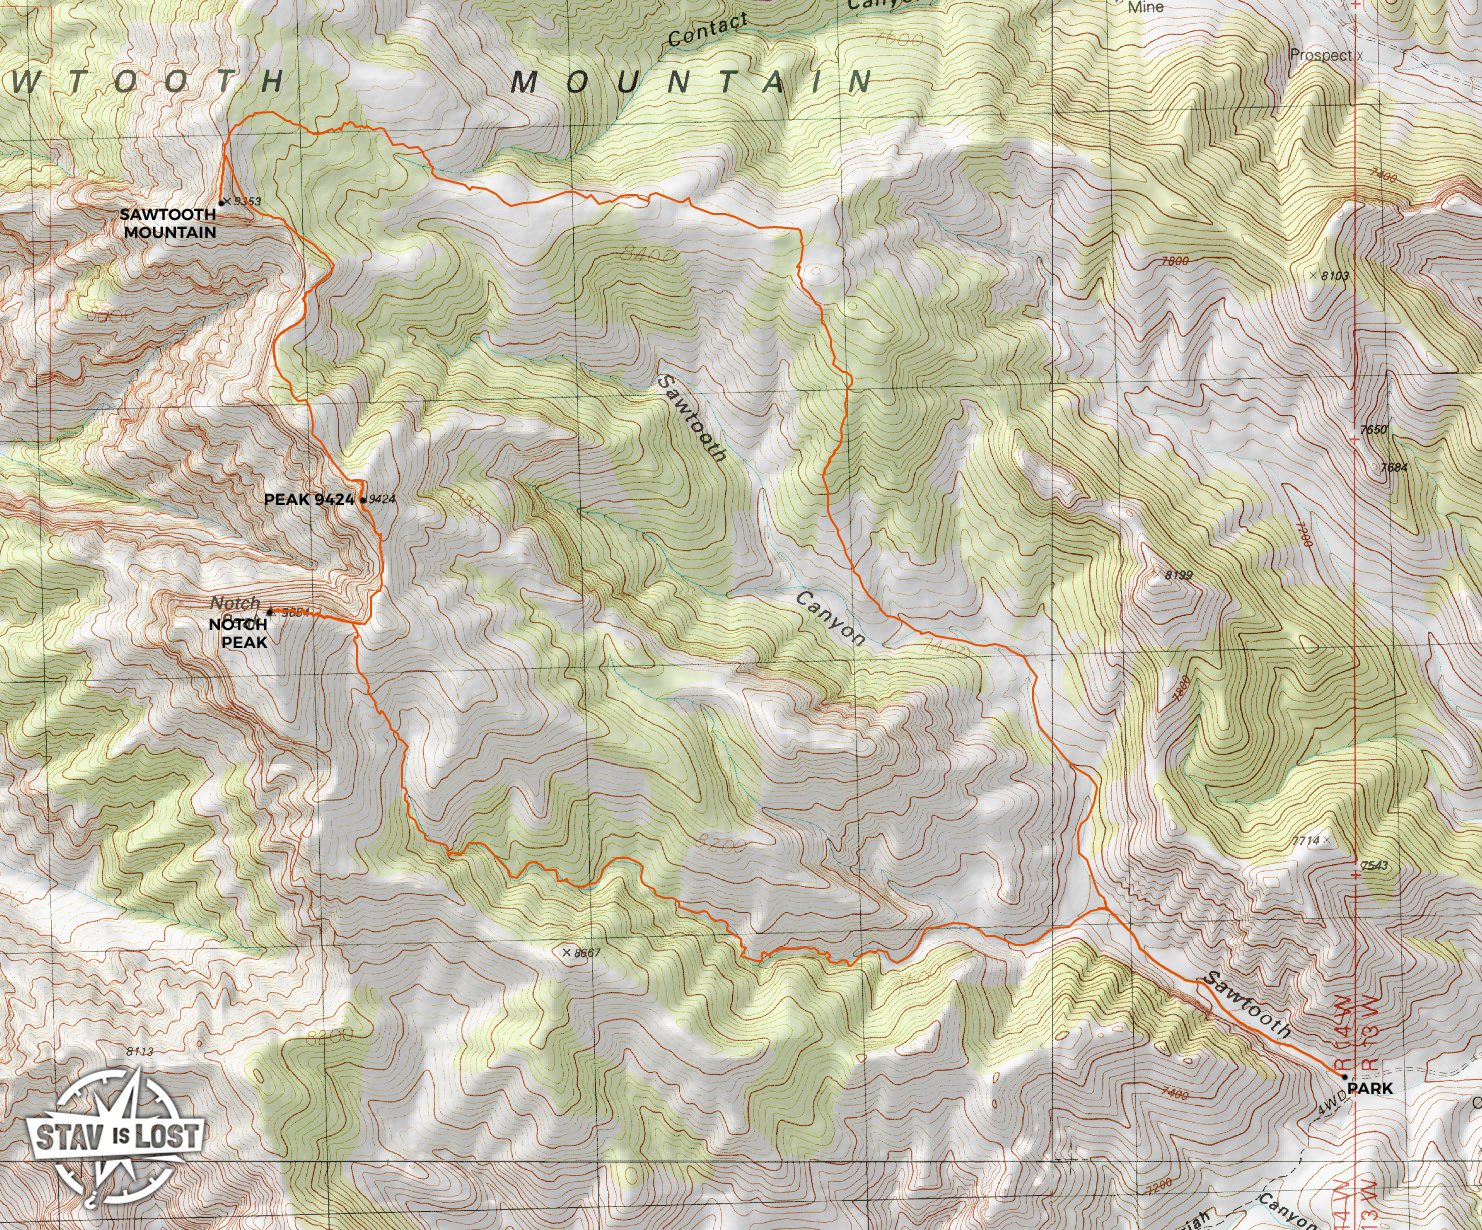 map for Notch Peak and Sawtooth Mountain Loop by stav is lost